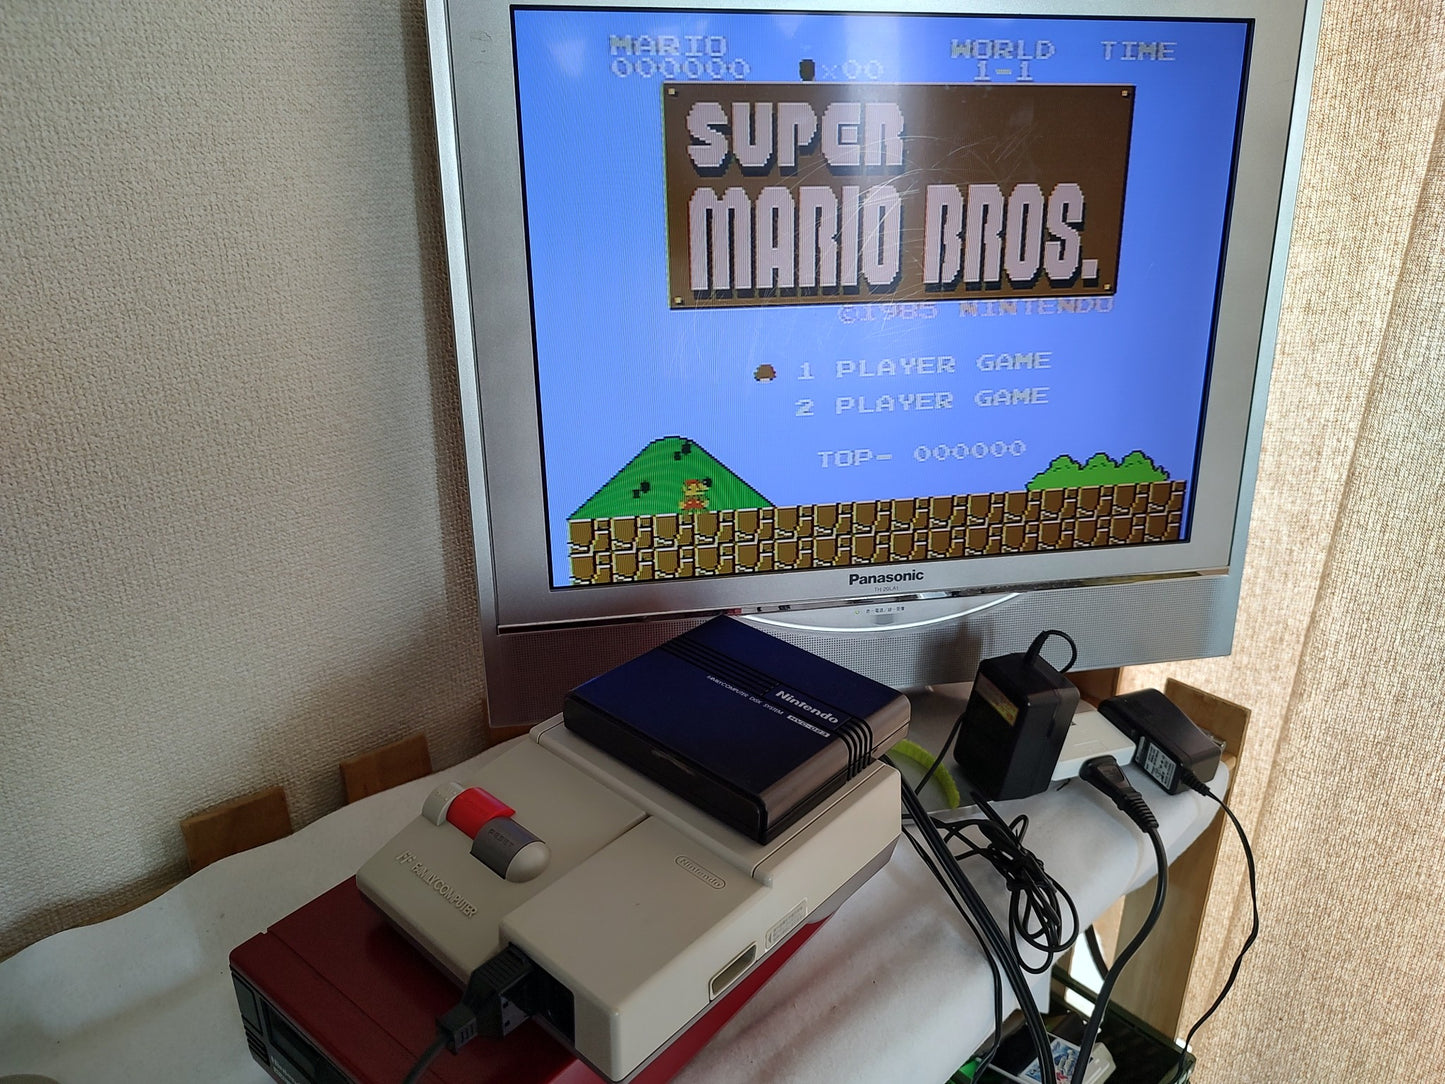 Super Mario Brothers (NES) Disk System, Game disk and box set, working-f0922-